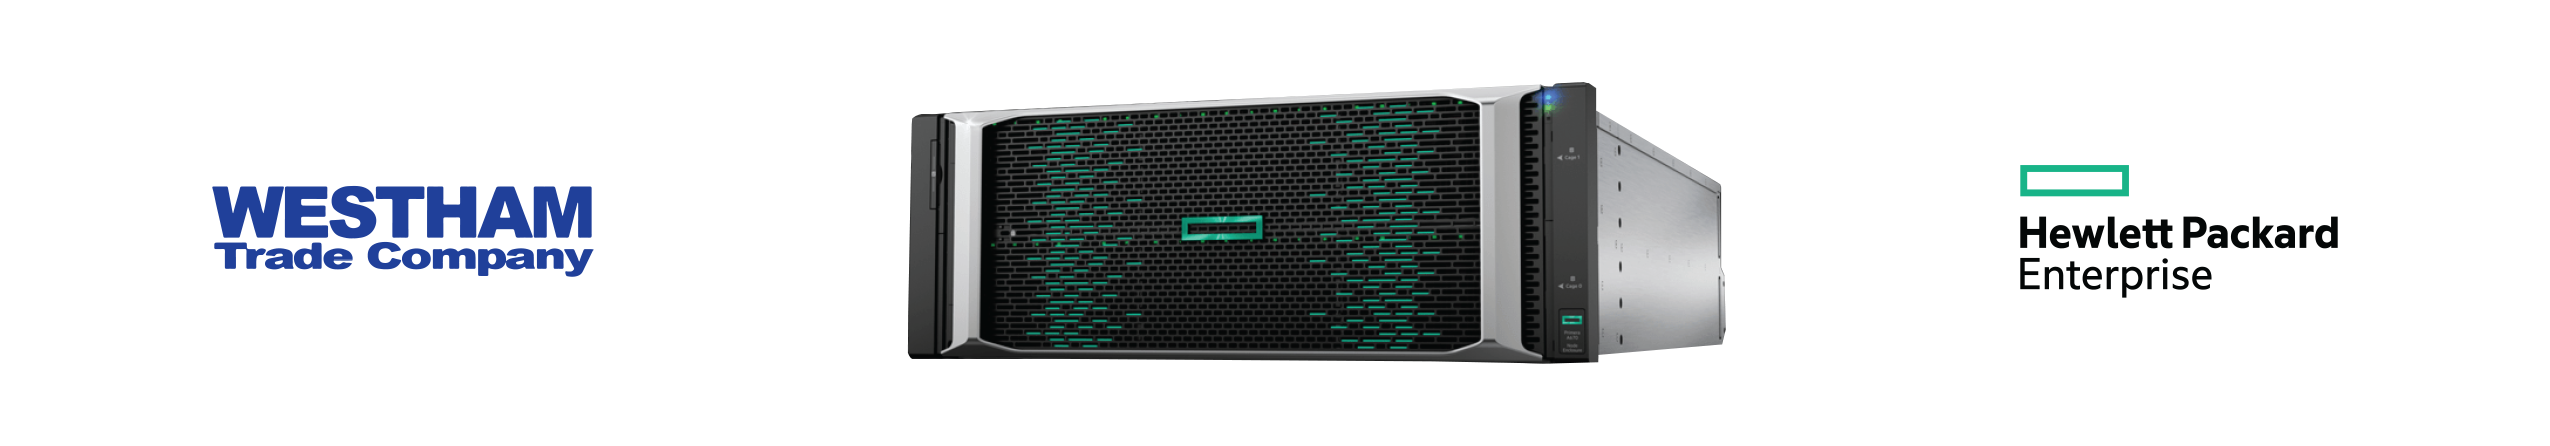 HPE Alletra - Power your data from edge to cloud-10